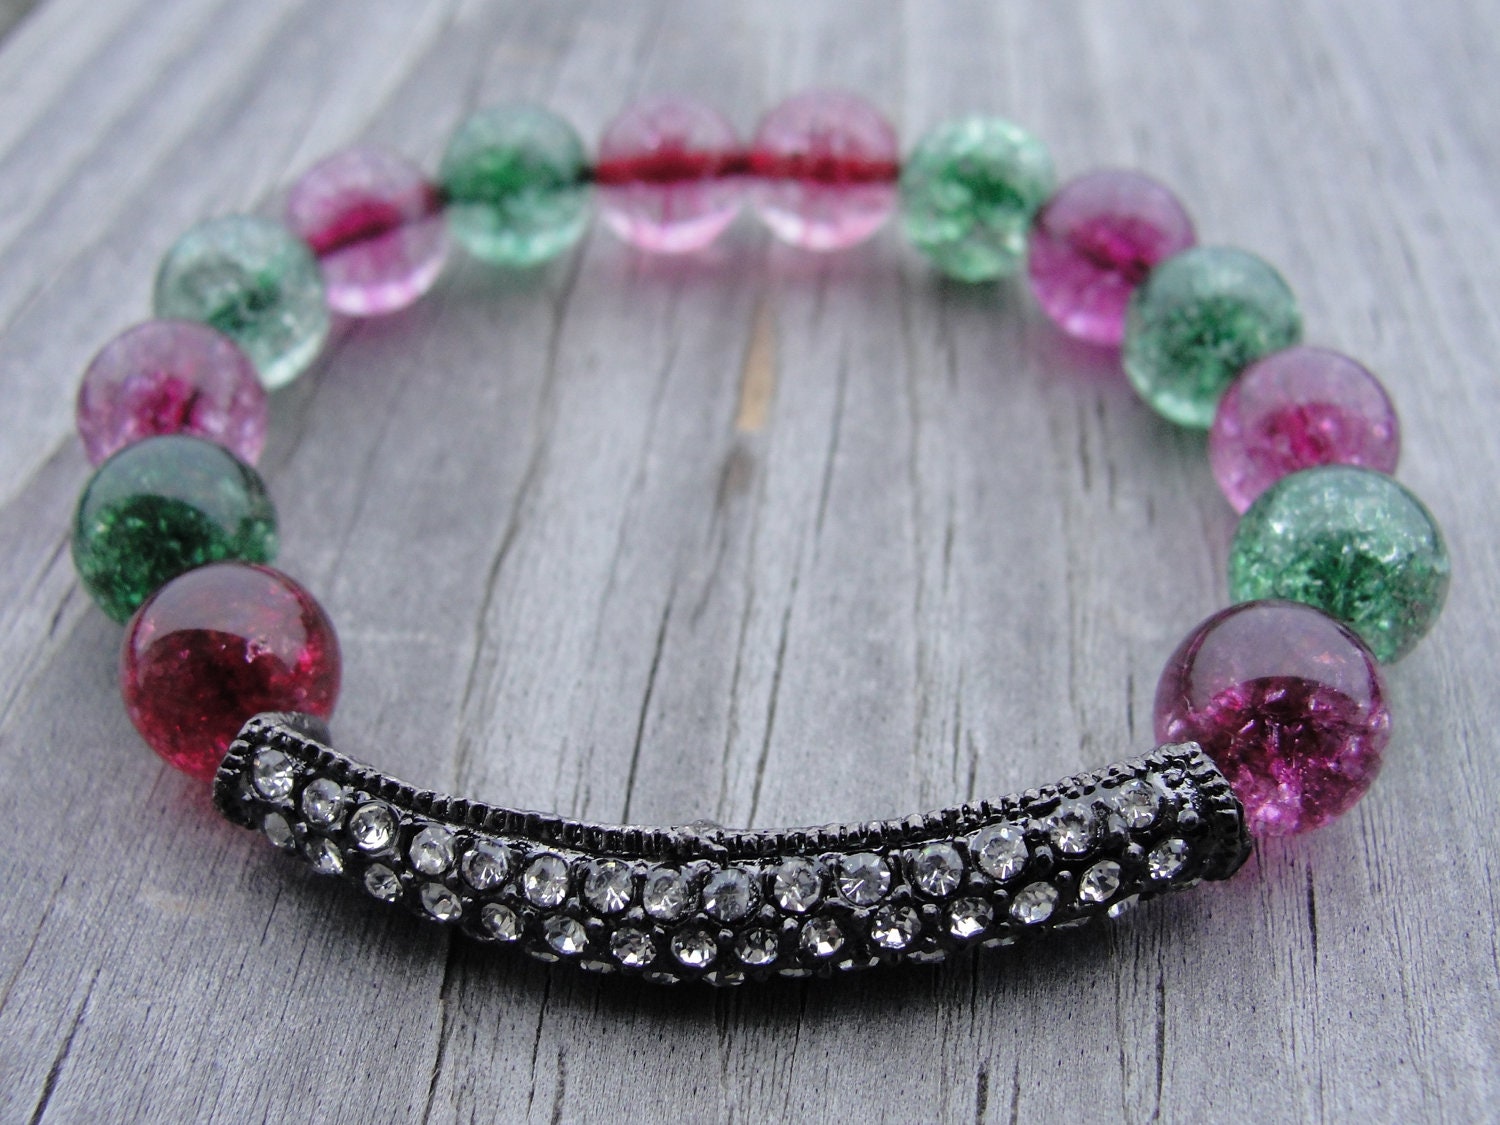 Black Gunmetal Crystal Bar with Pink and Green Glass Beads Bracelet